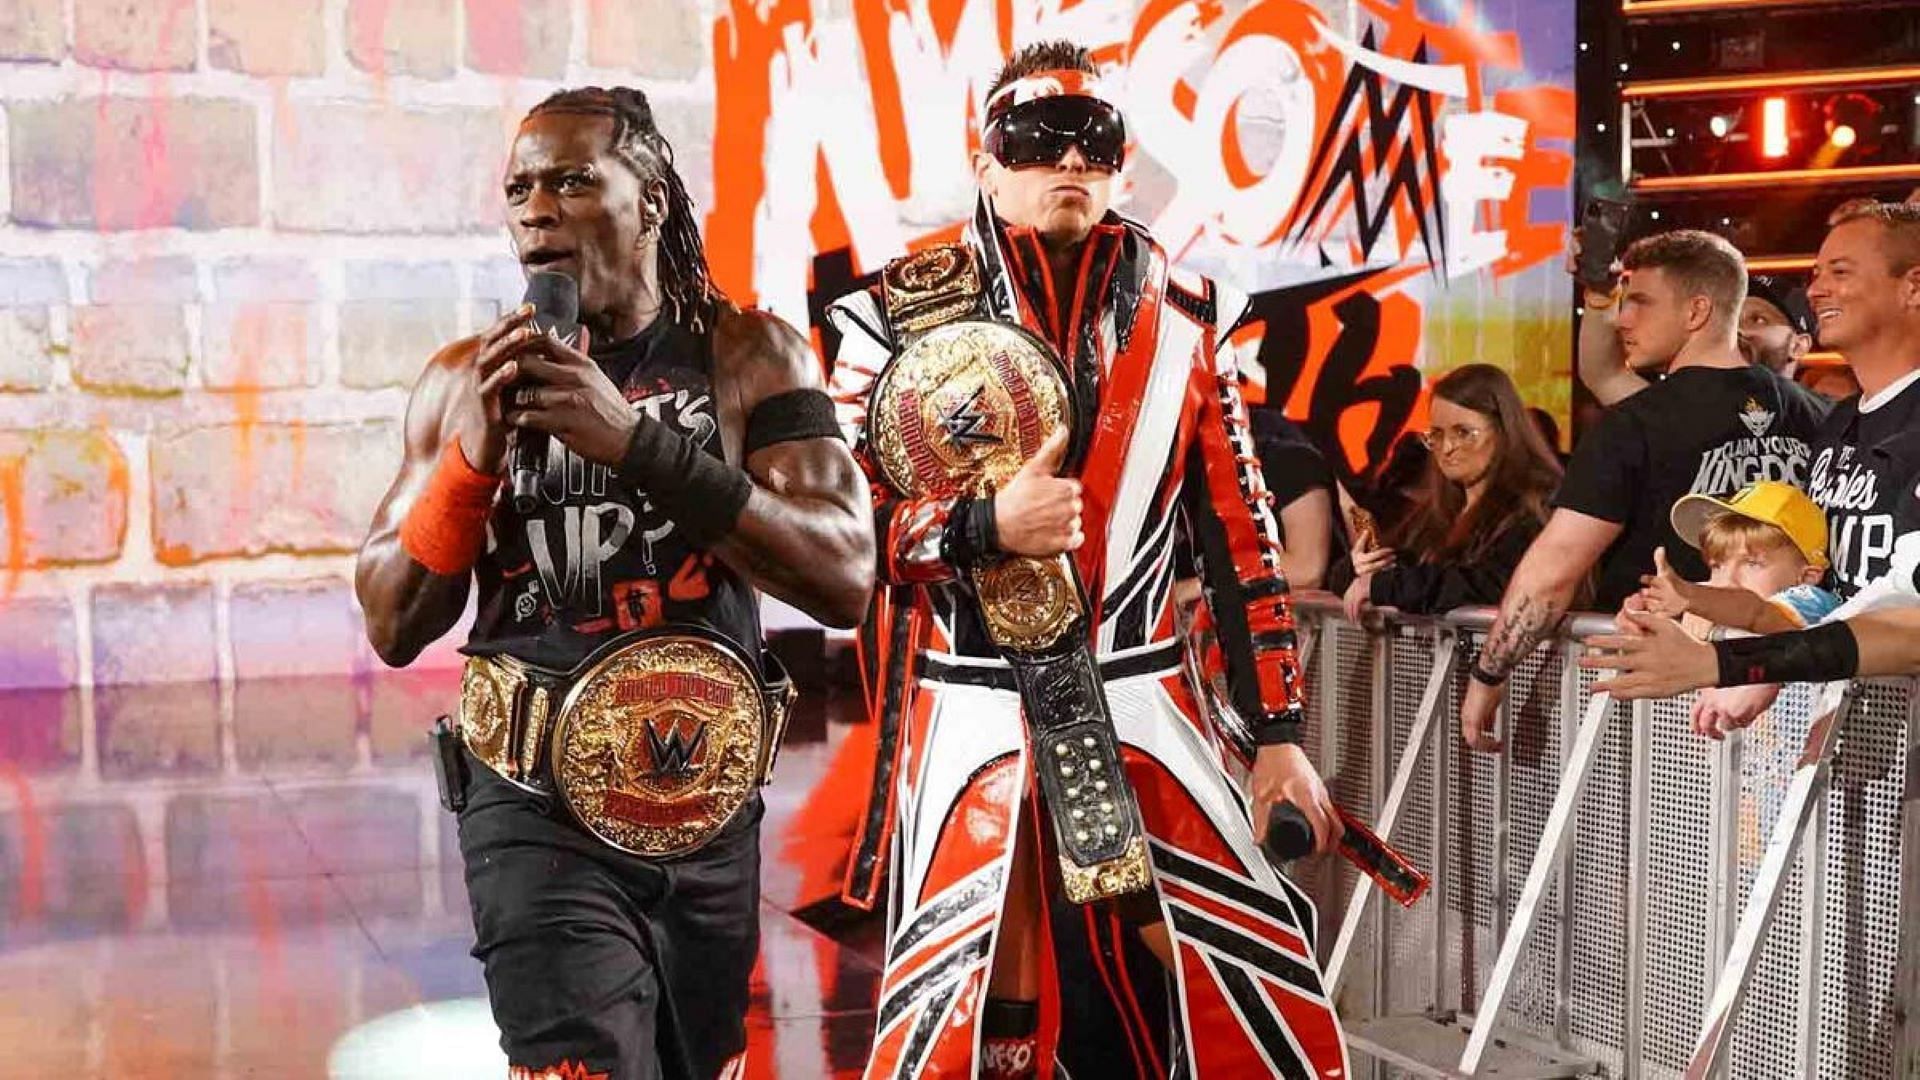 Will one of the newer teams dethrone R-Truth and The Miz?